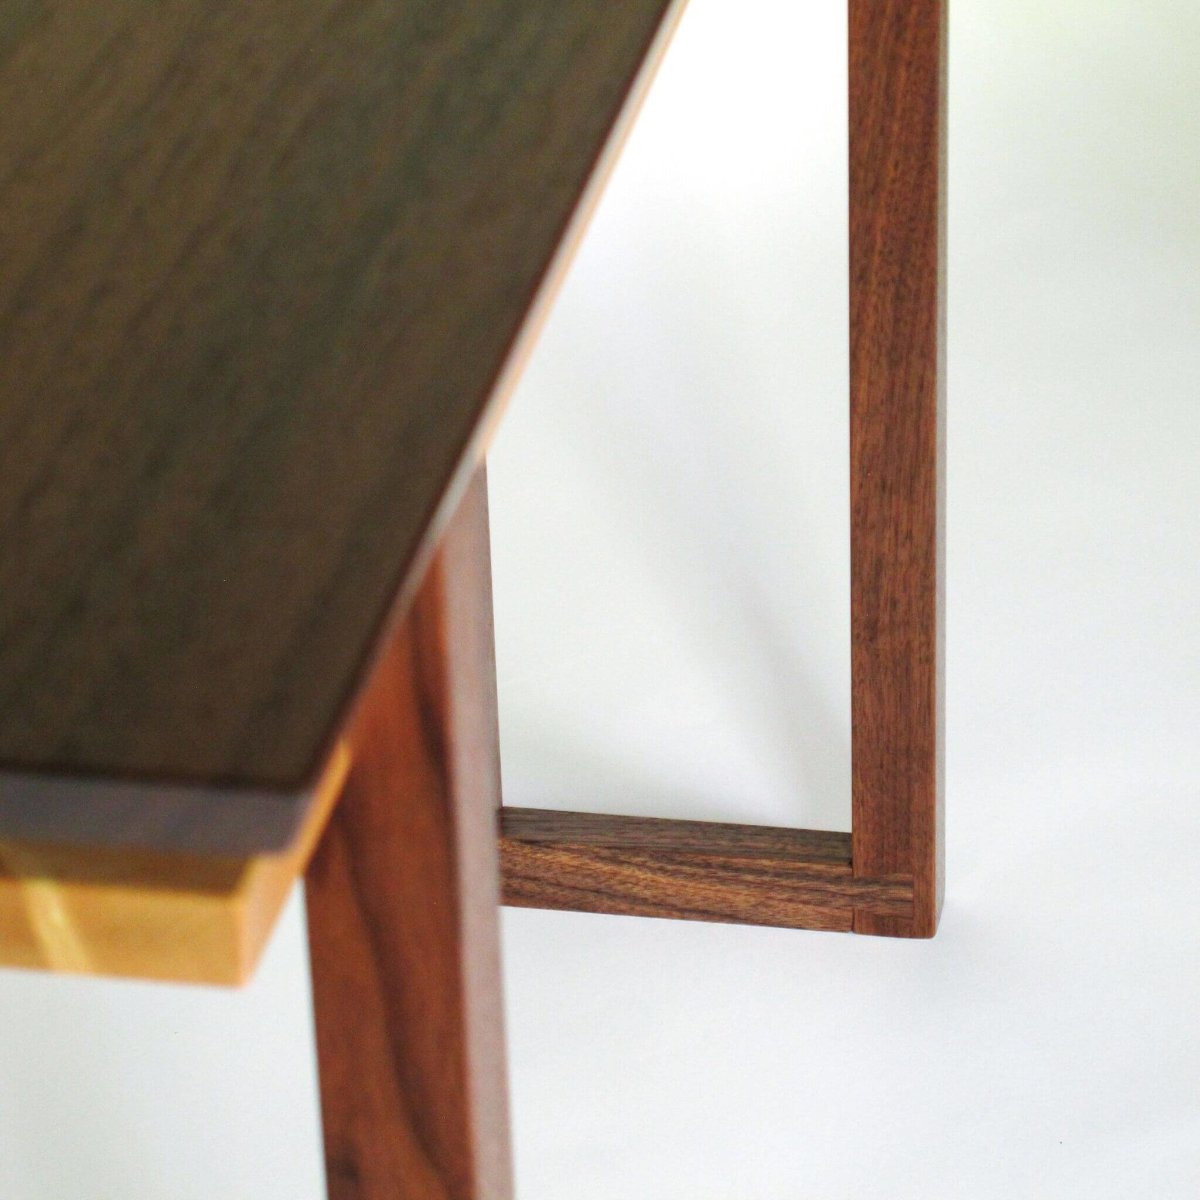 Our modern wood console tables feature unique details like these dovetail feet on our walnut and maple console table that is perfect for narrow hallway decorating.  Wood Furniture designs from Mokuzai Furniture